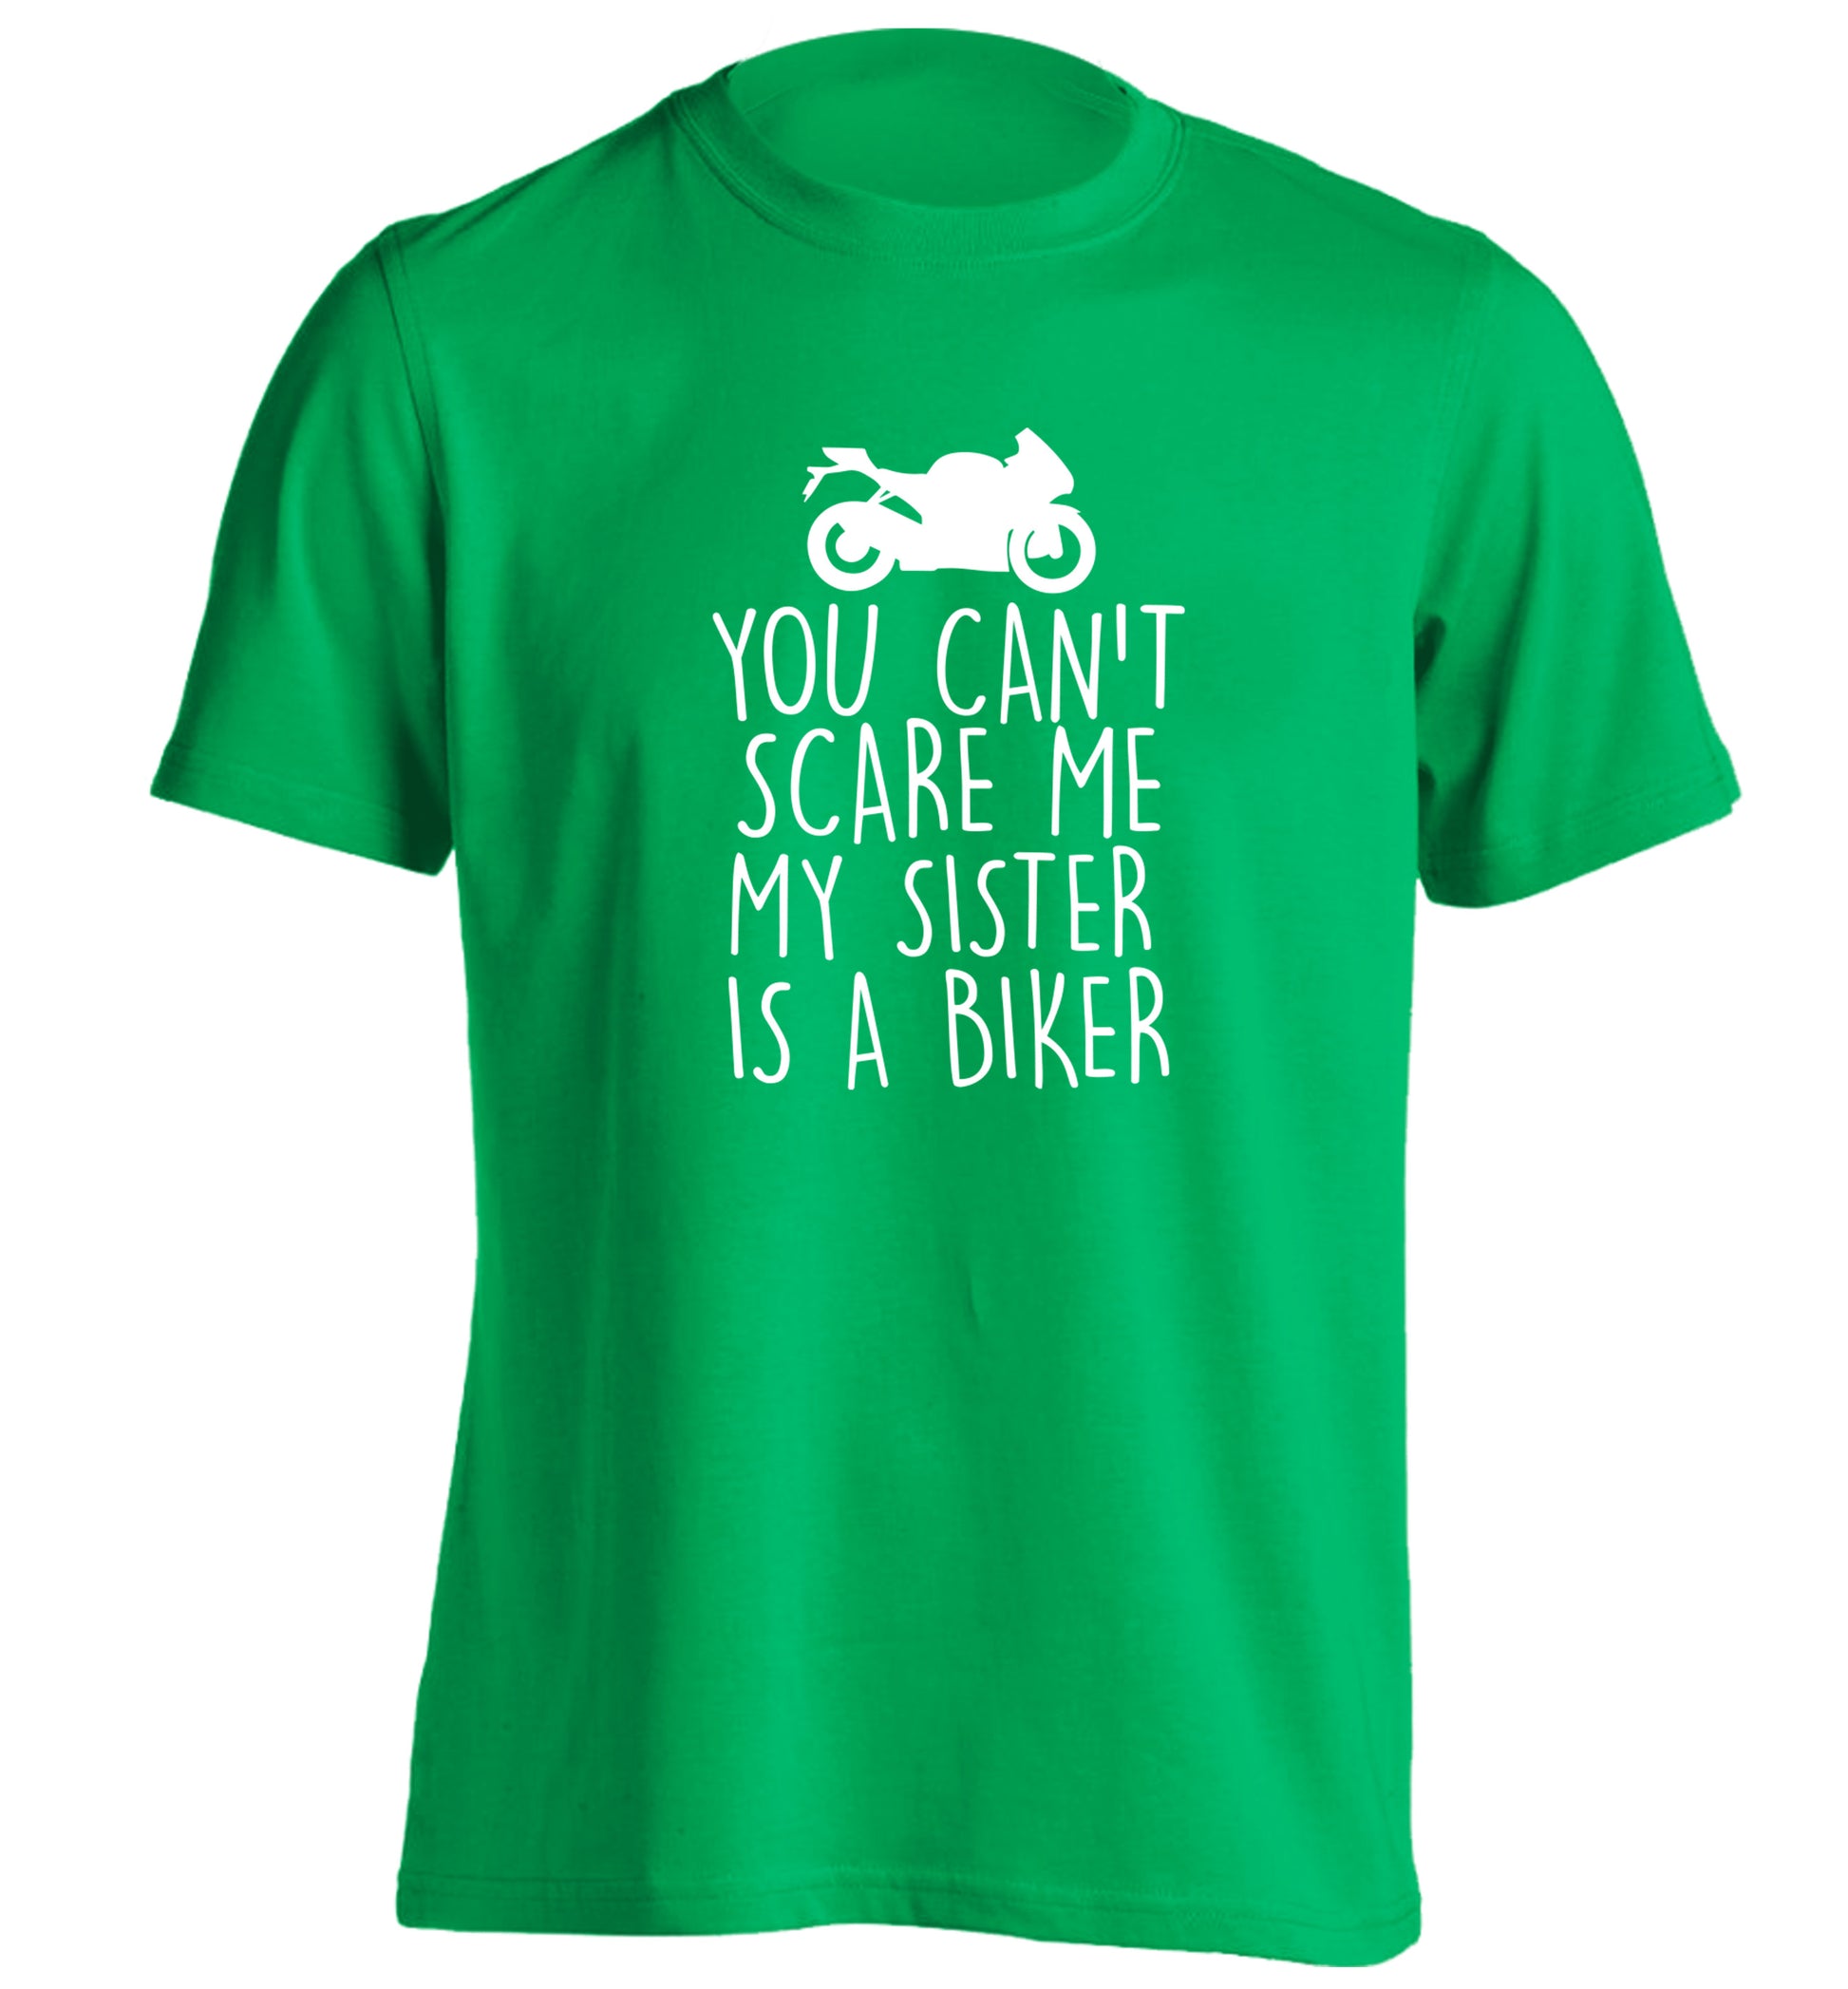 You can't scare me my sister is a biker adults unisex green Tshirt 2XL